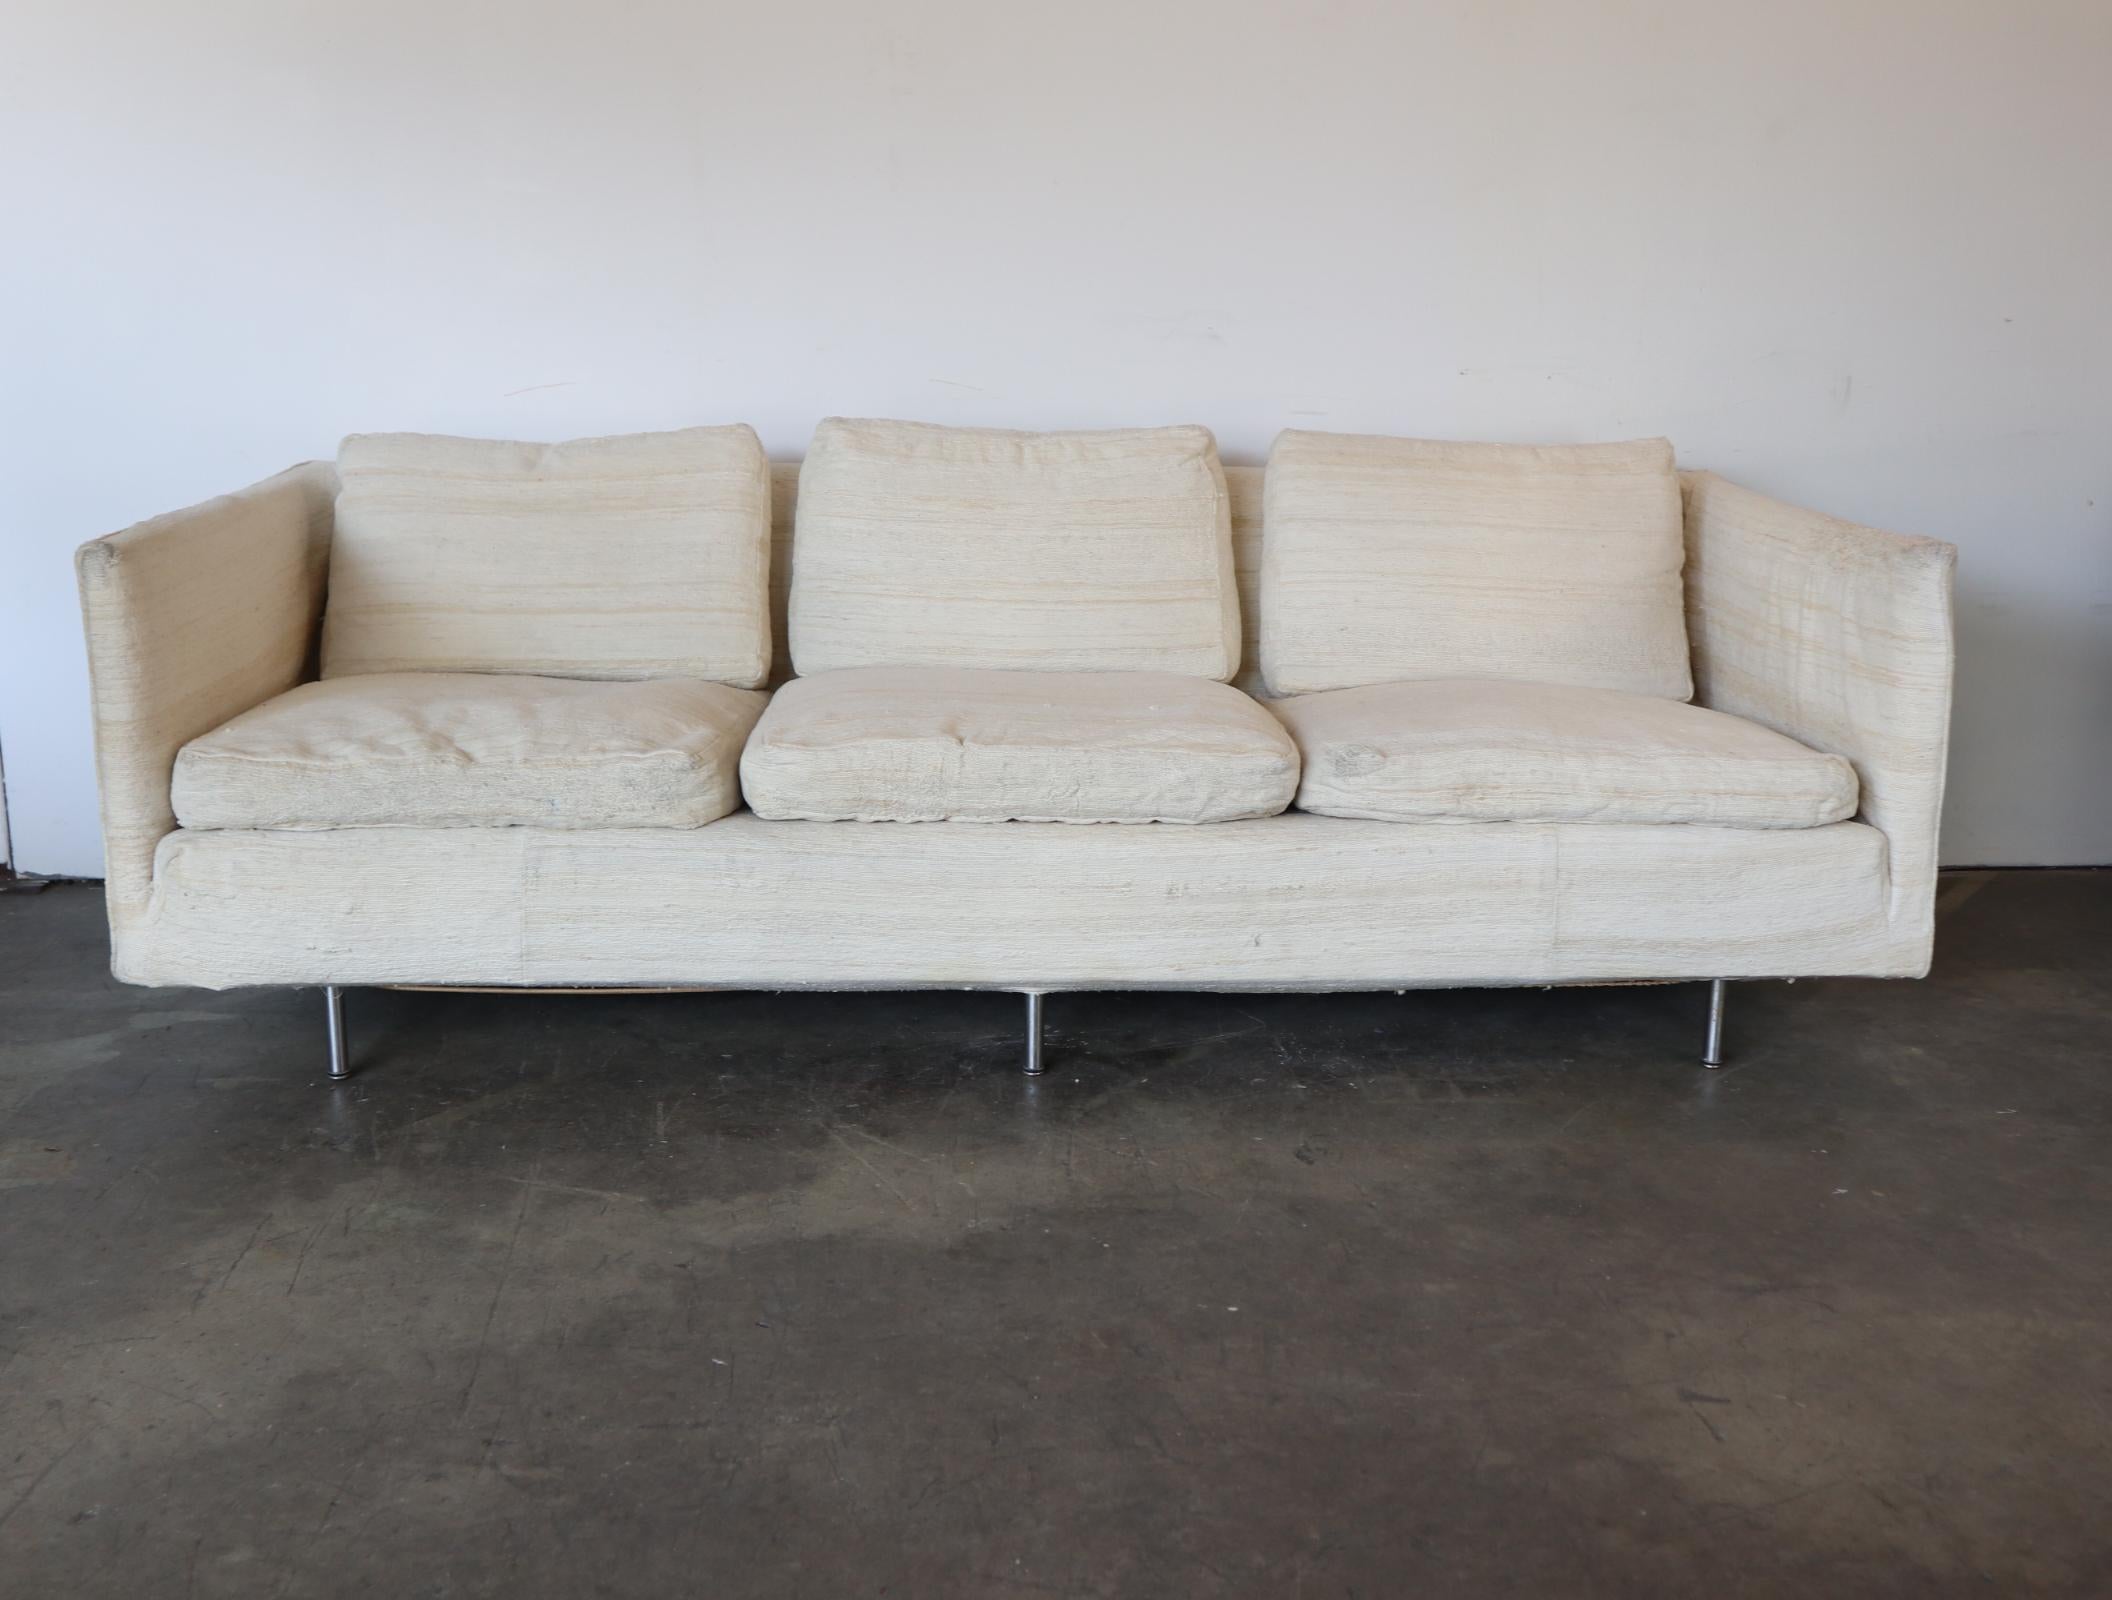 Gorgeous Mid-Century Modern sofa designed by Ben Thompson for Design Research. Purchased from the estate of abstract Expressionist painter in Manhattan, the sole owner. Made in the 1960s. Haitian cotton slip cover is removable. Very comfortable down